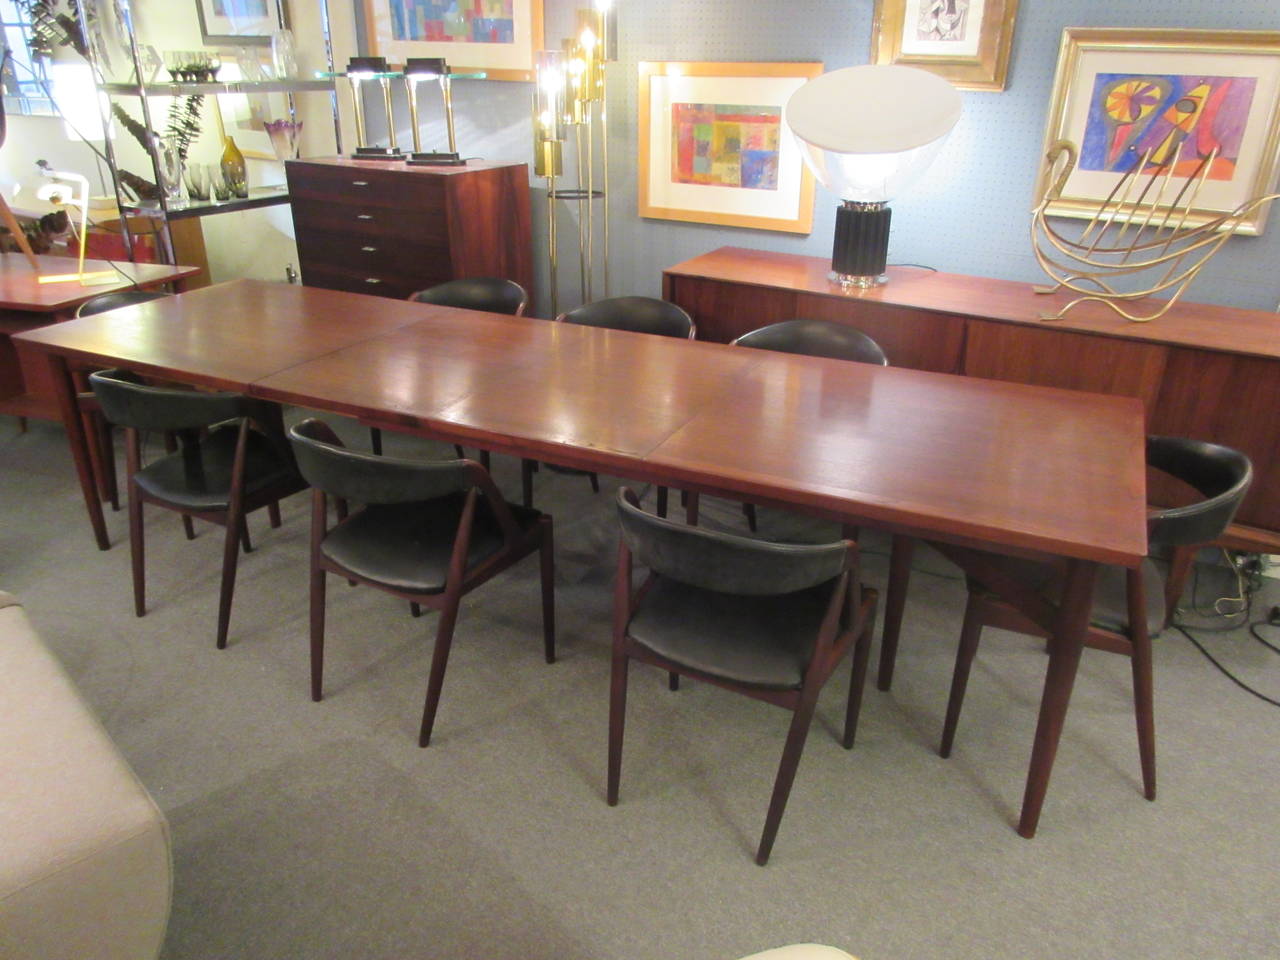 Very large table with two leaves and eight matching chairs bought in Denmark in the mid-1950s The table has three legs at either end joined by stretchers and has two large leaves with flattened pegs to join table. The table is 74.5 x 35.5 when